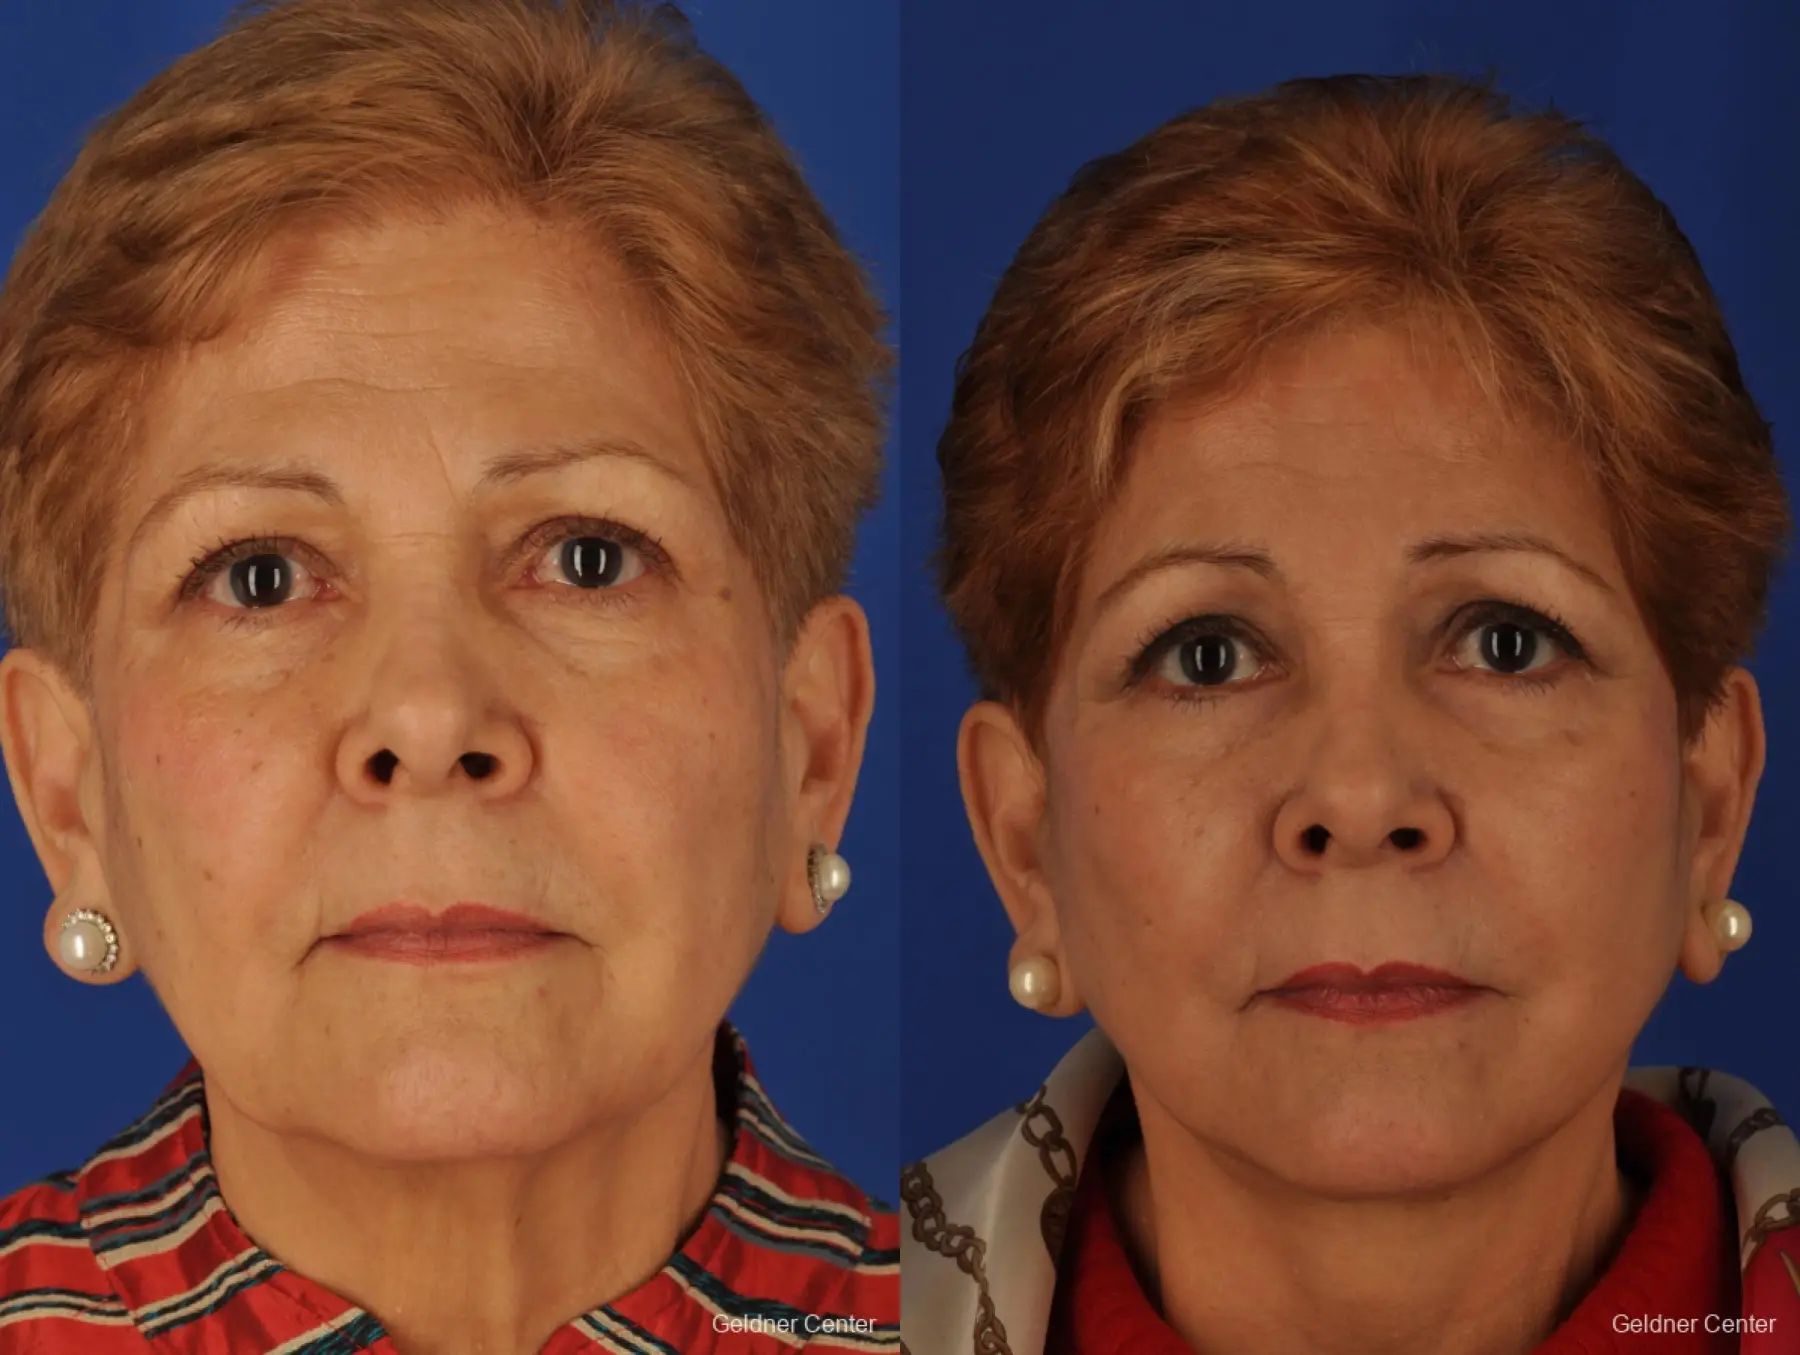 67 year old woman from Chicago, endoscopic brow lift - Before and After